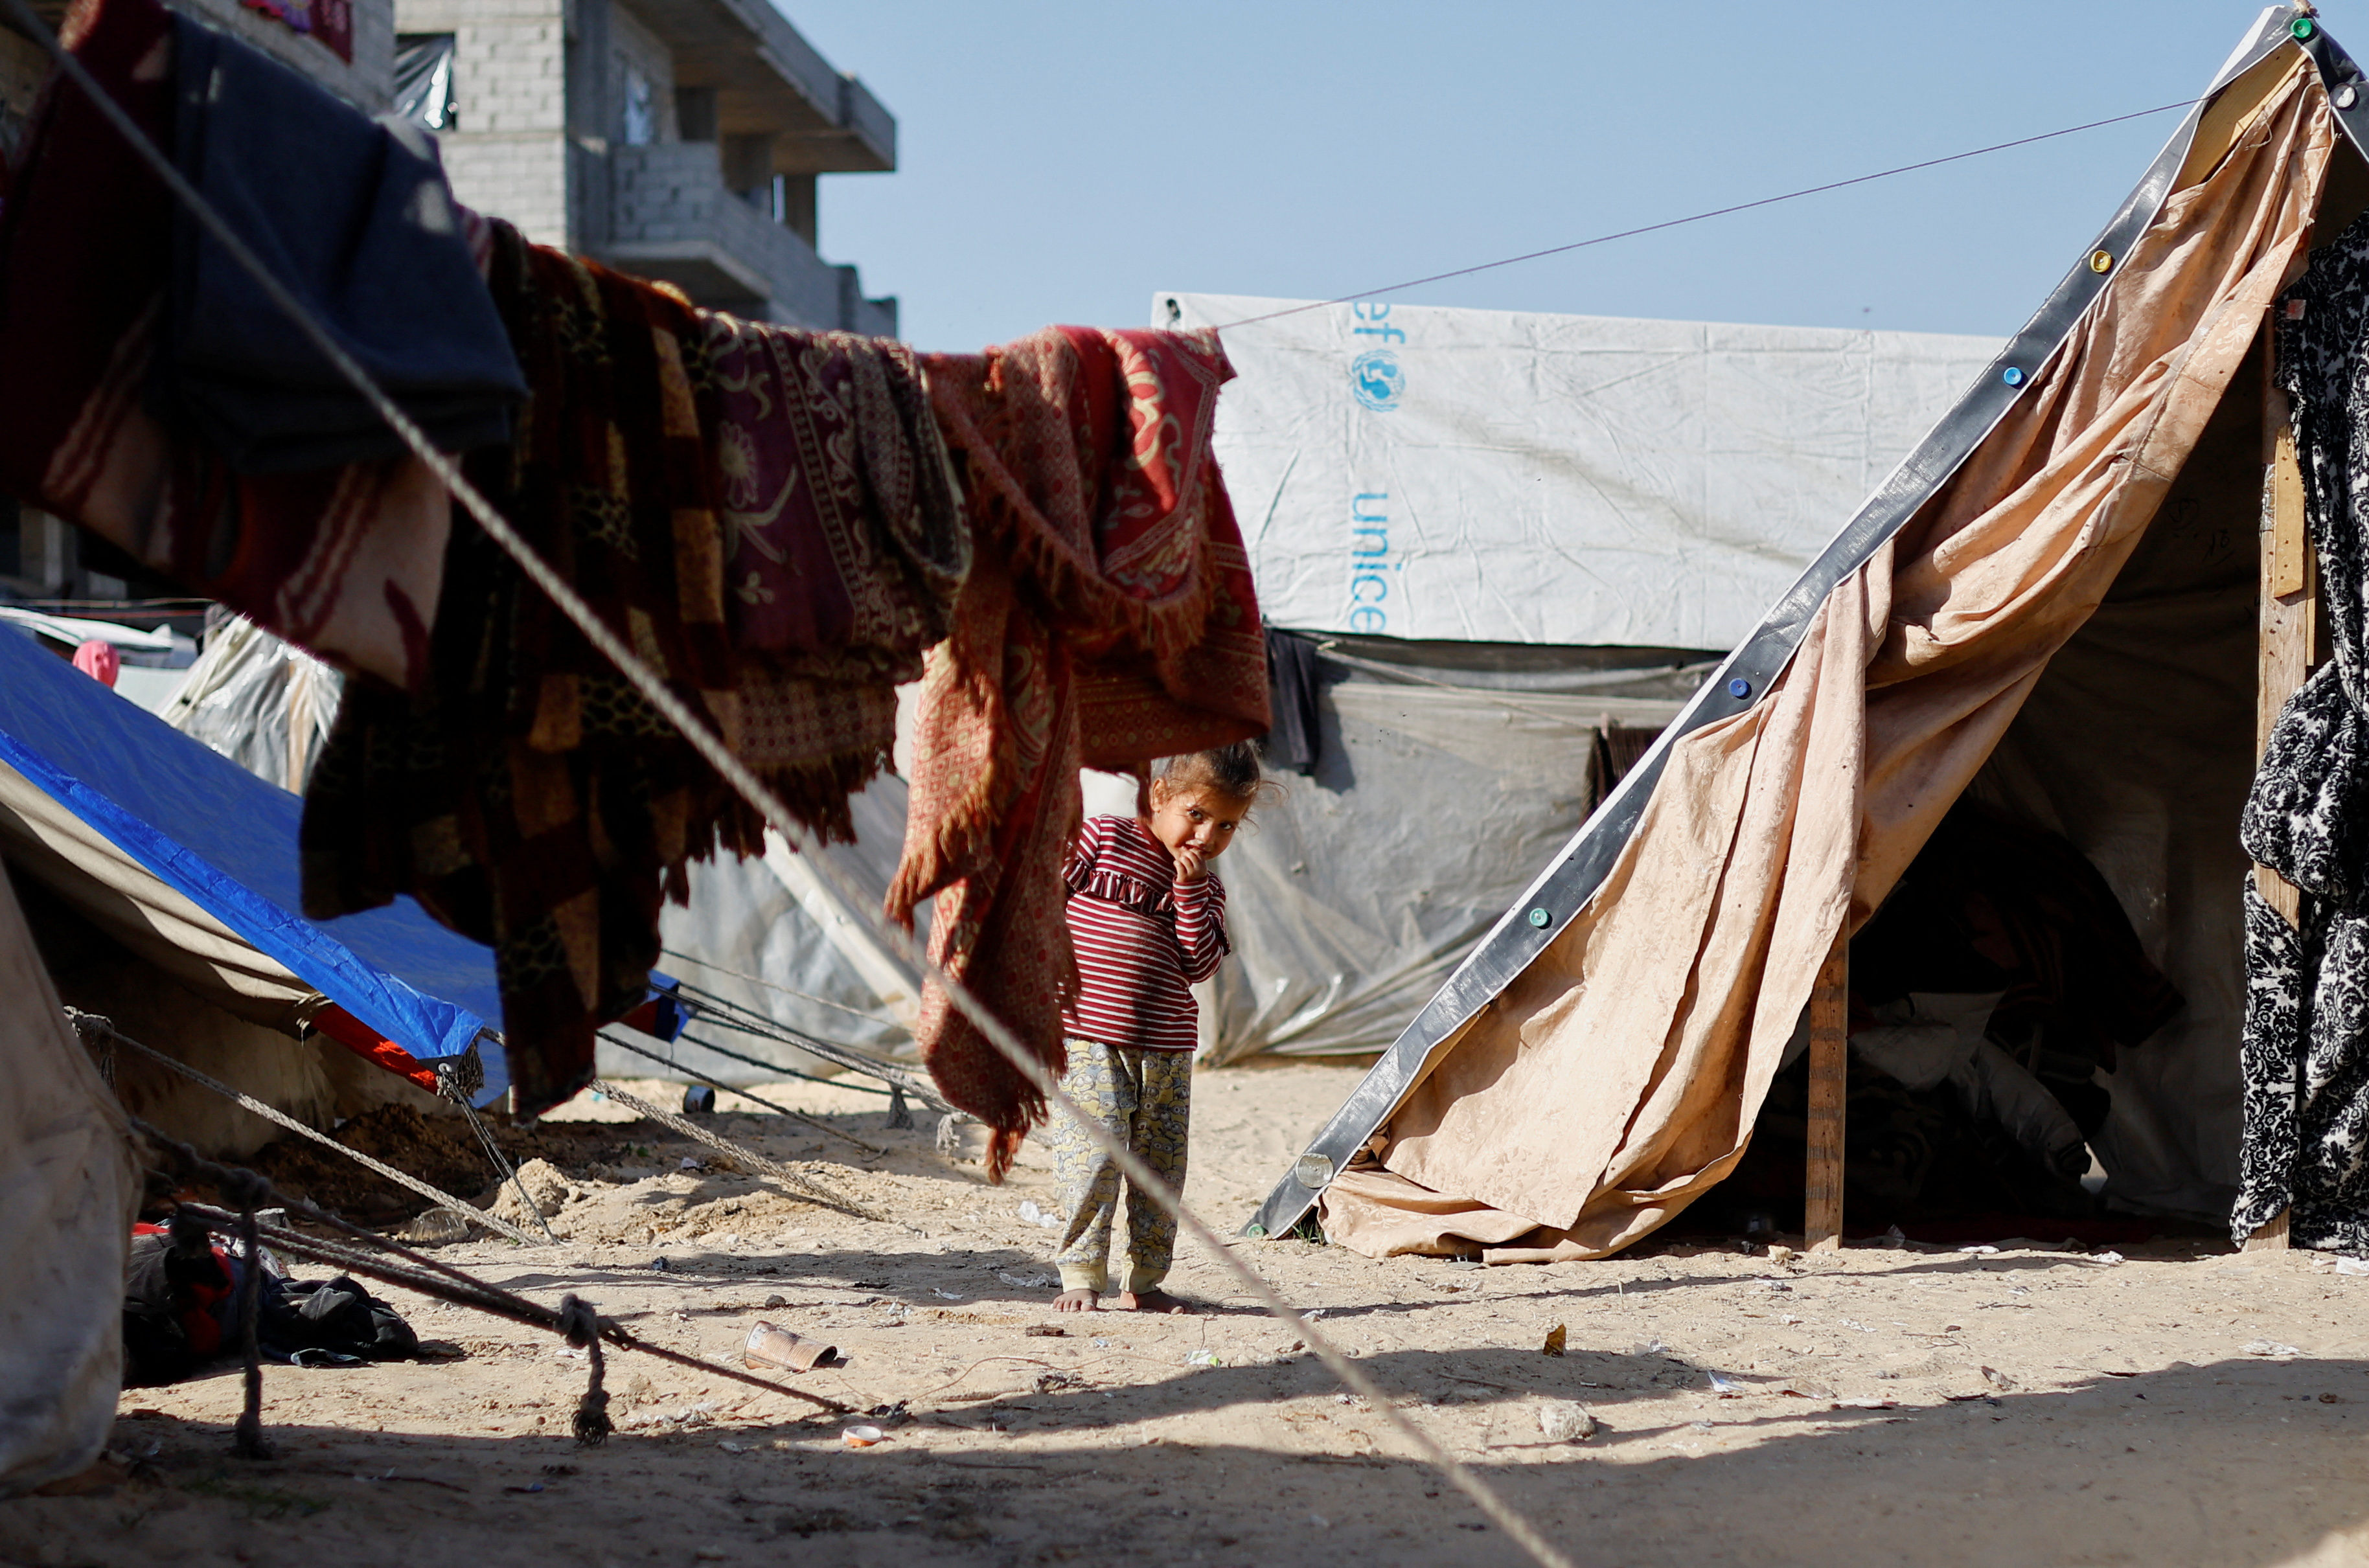 A displaced Palestinian child, who fled their house due to Israeli strikes, looks on inside a tent camp